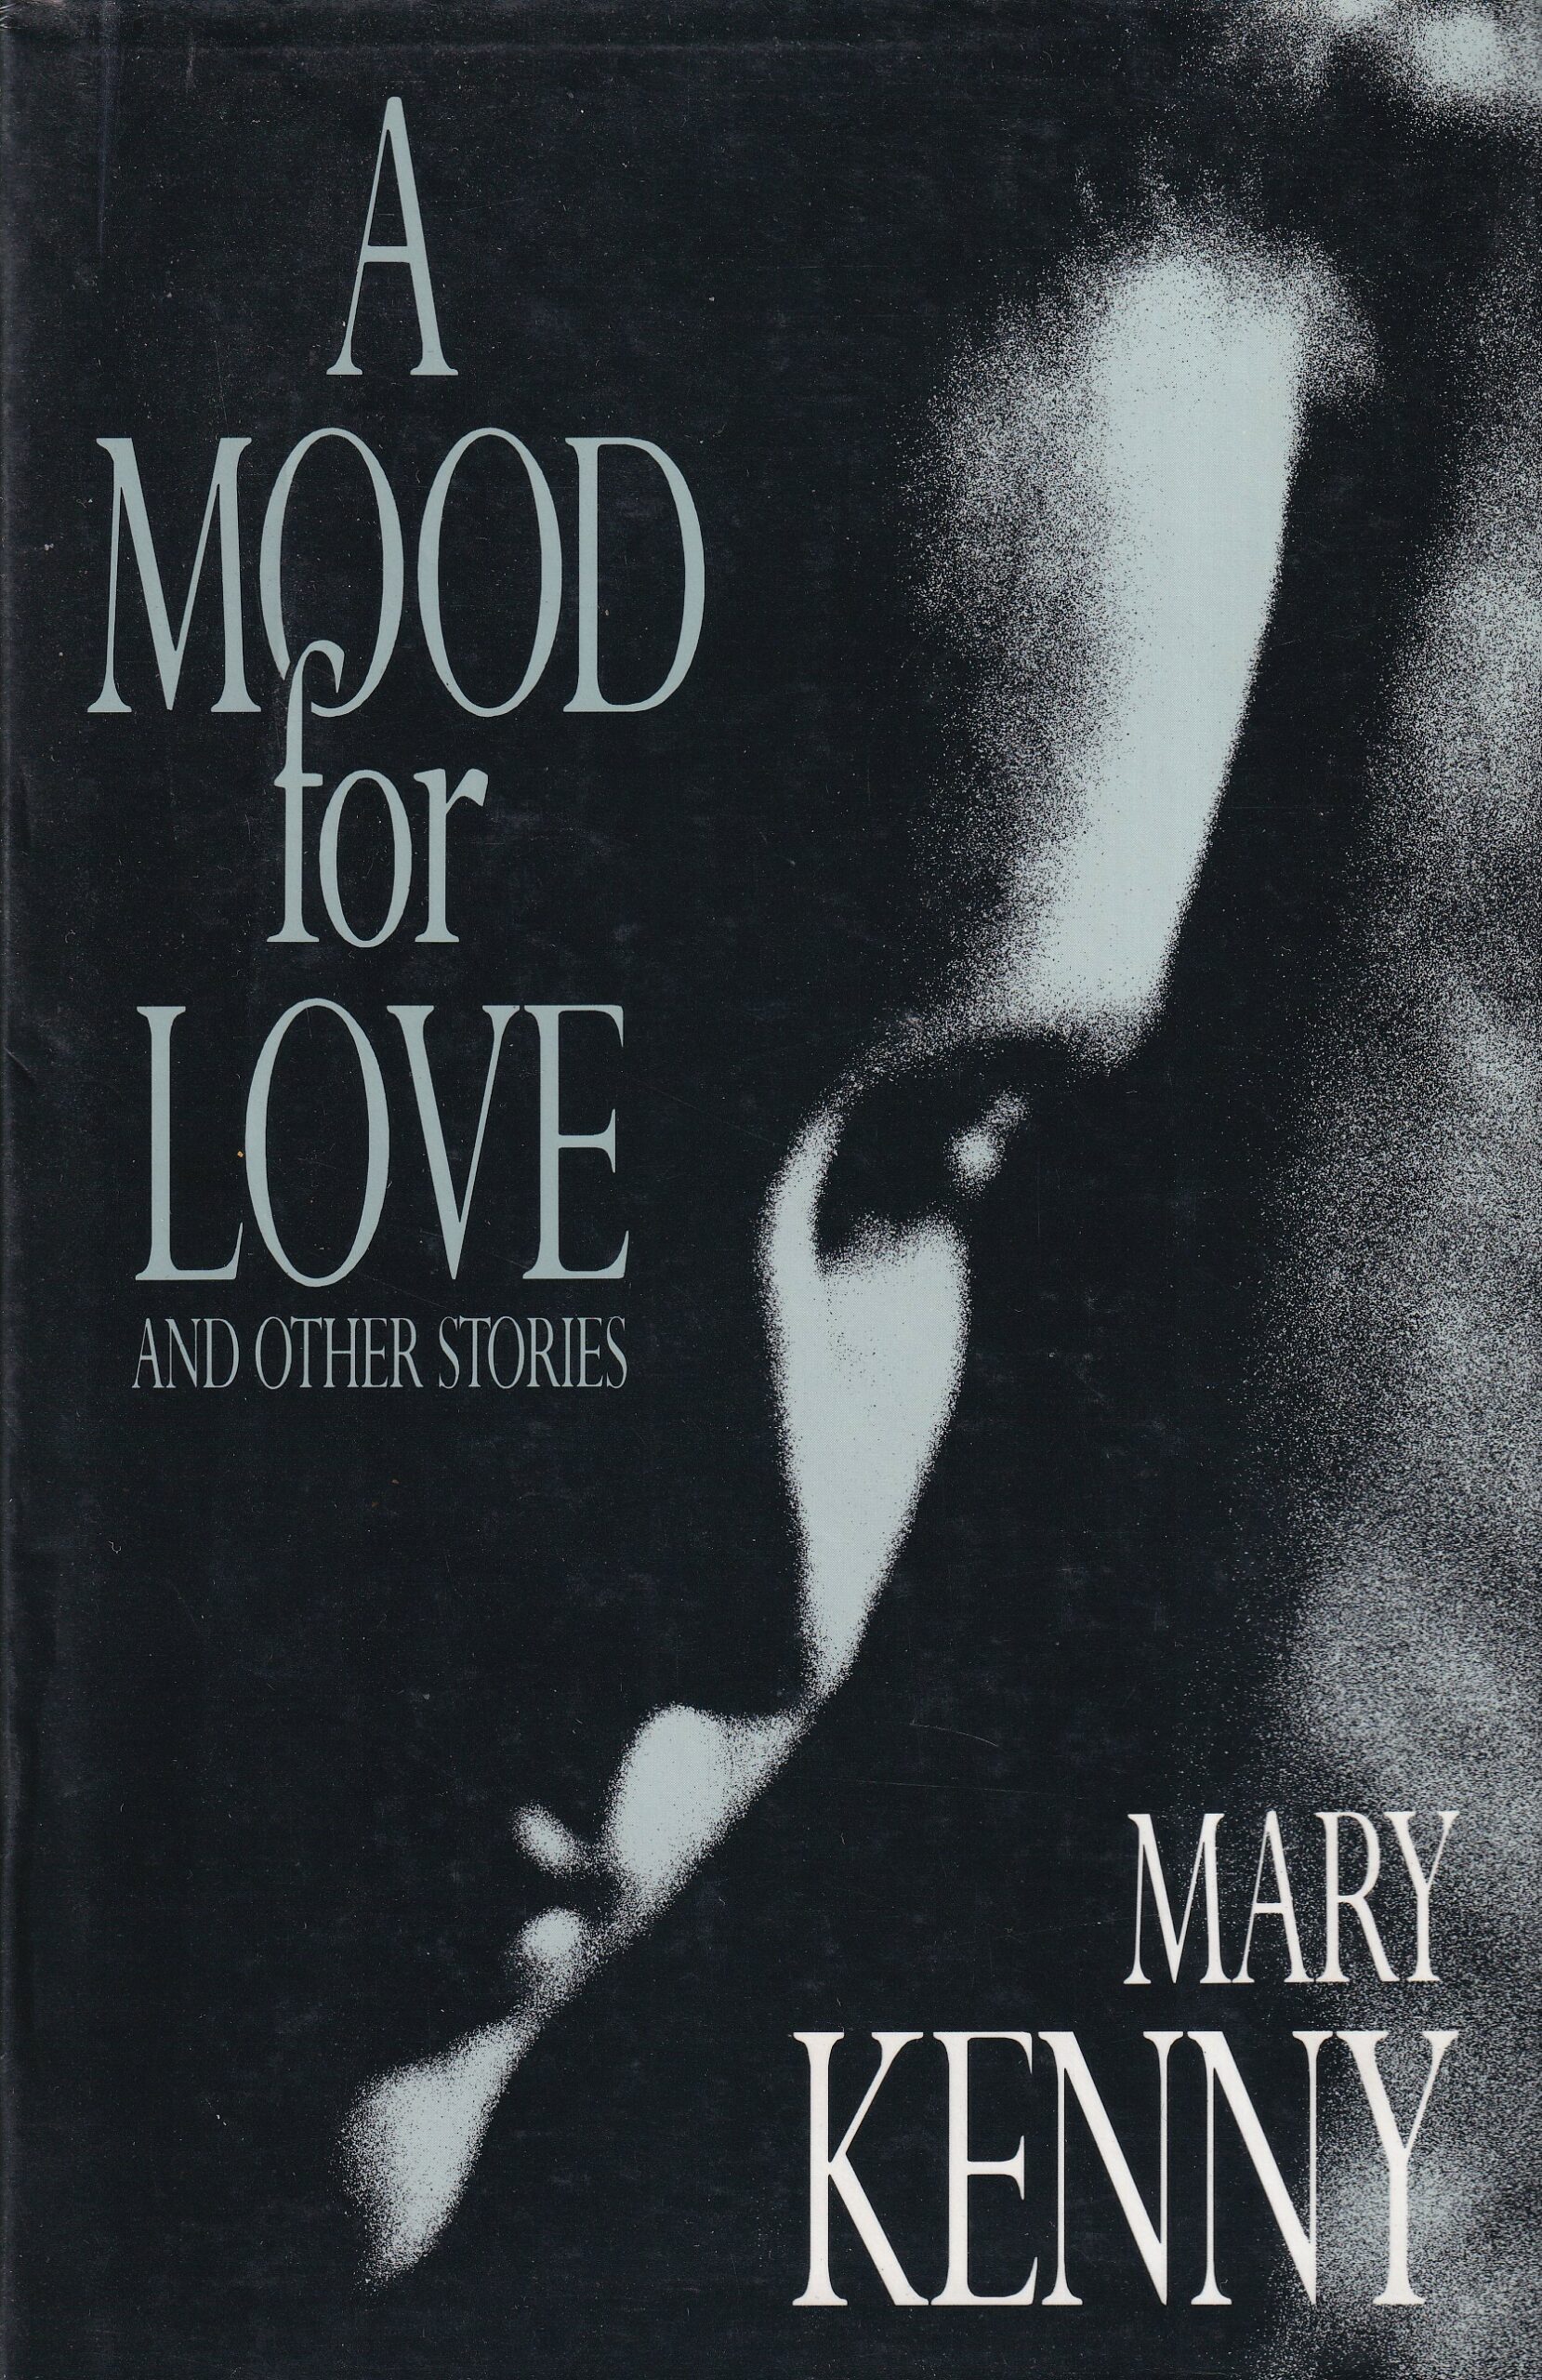 A Mood for Love and Other Stories | Mary Kenny | Charlie Byrne's